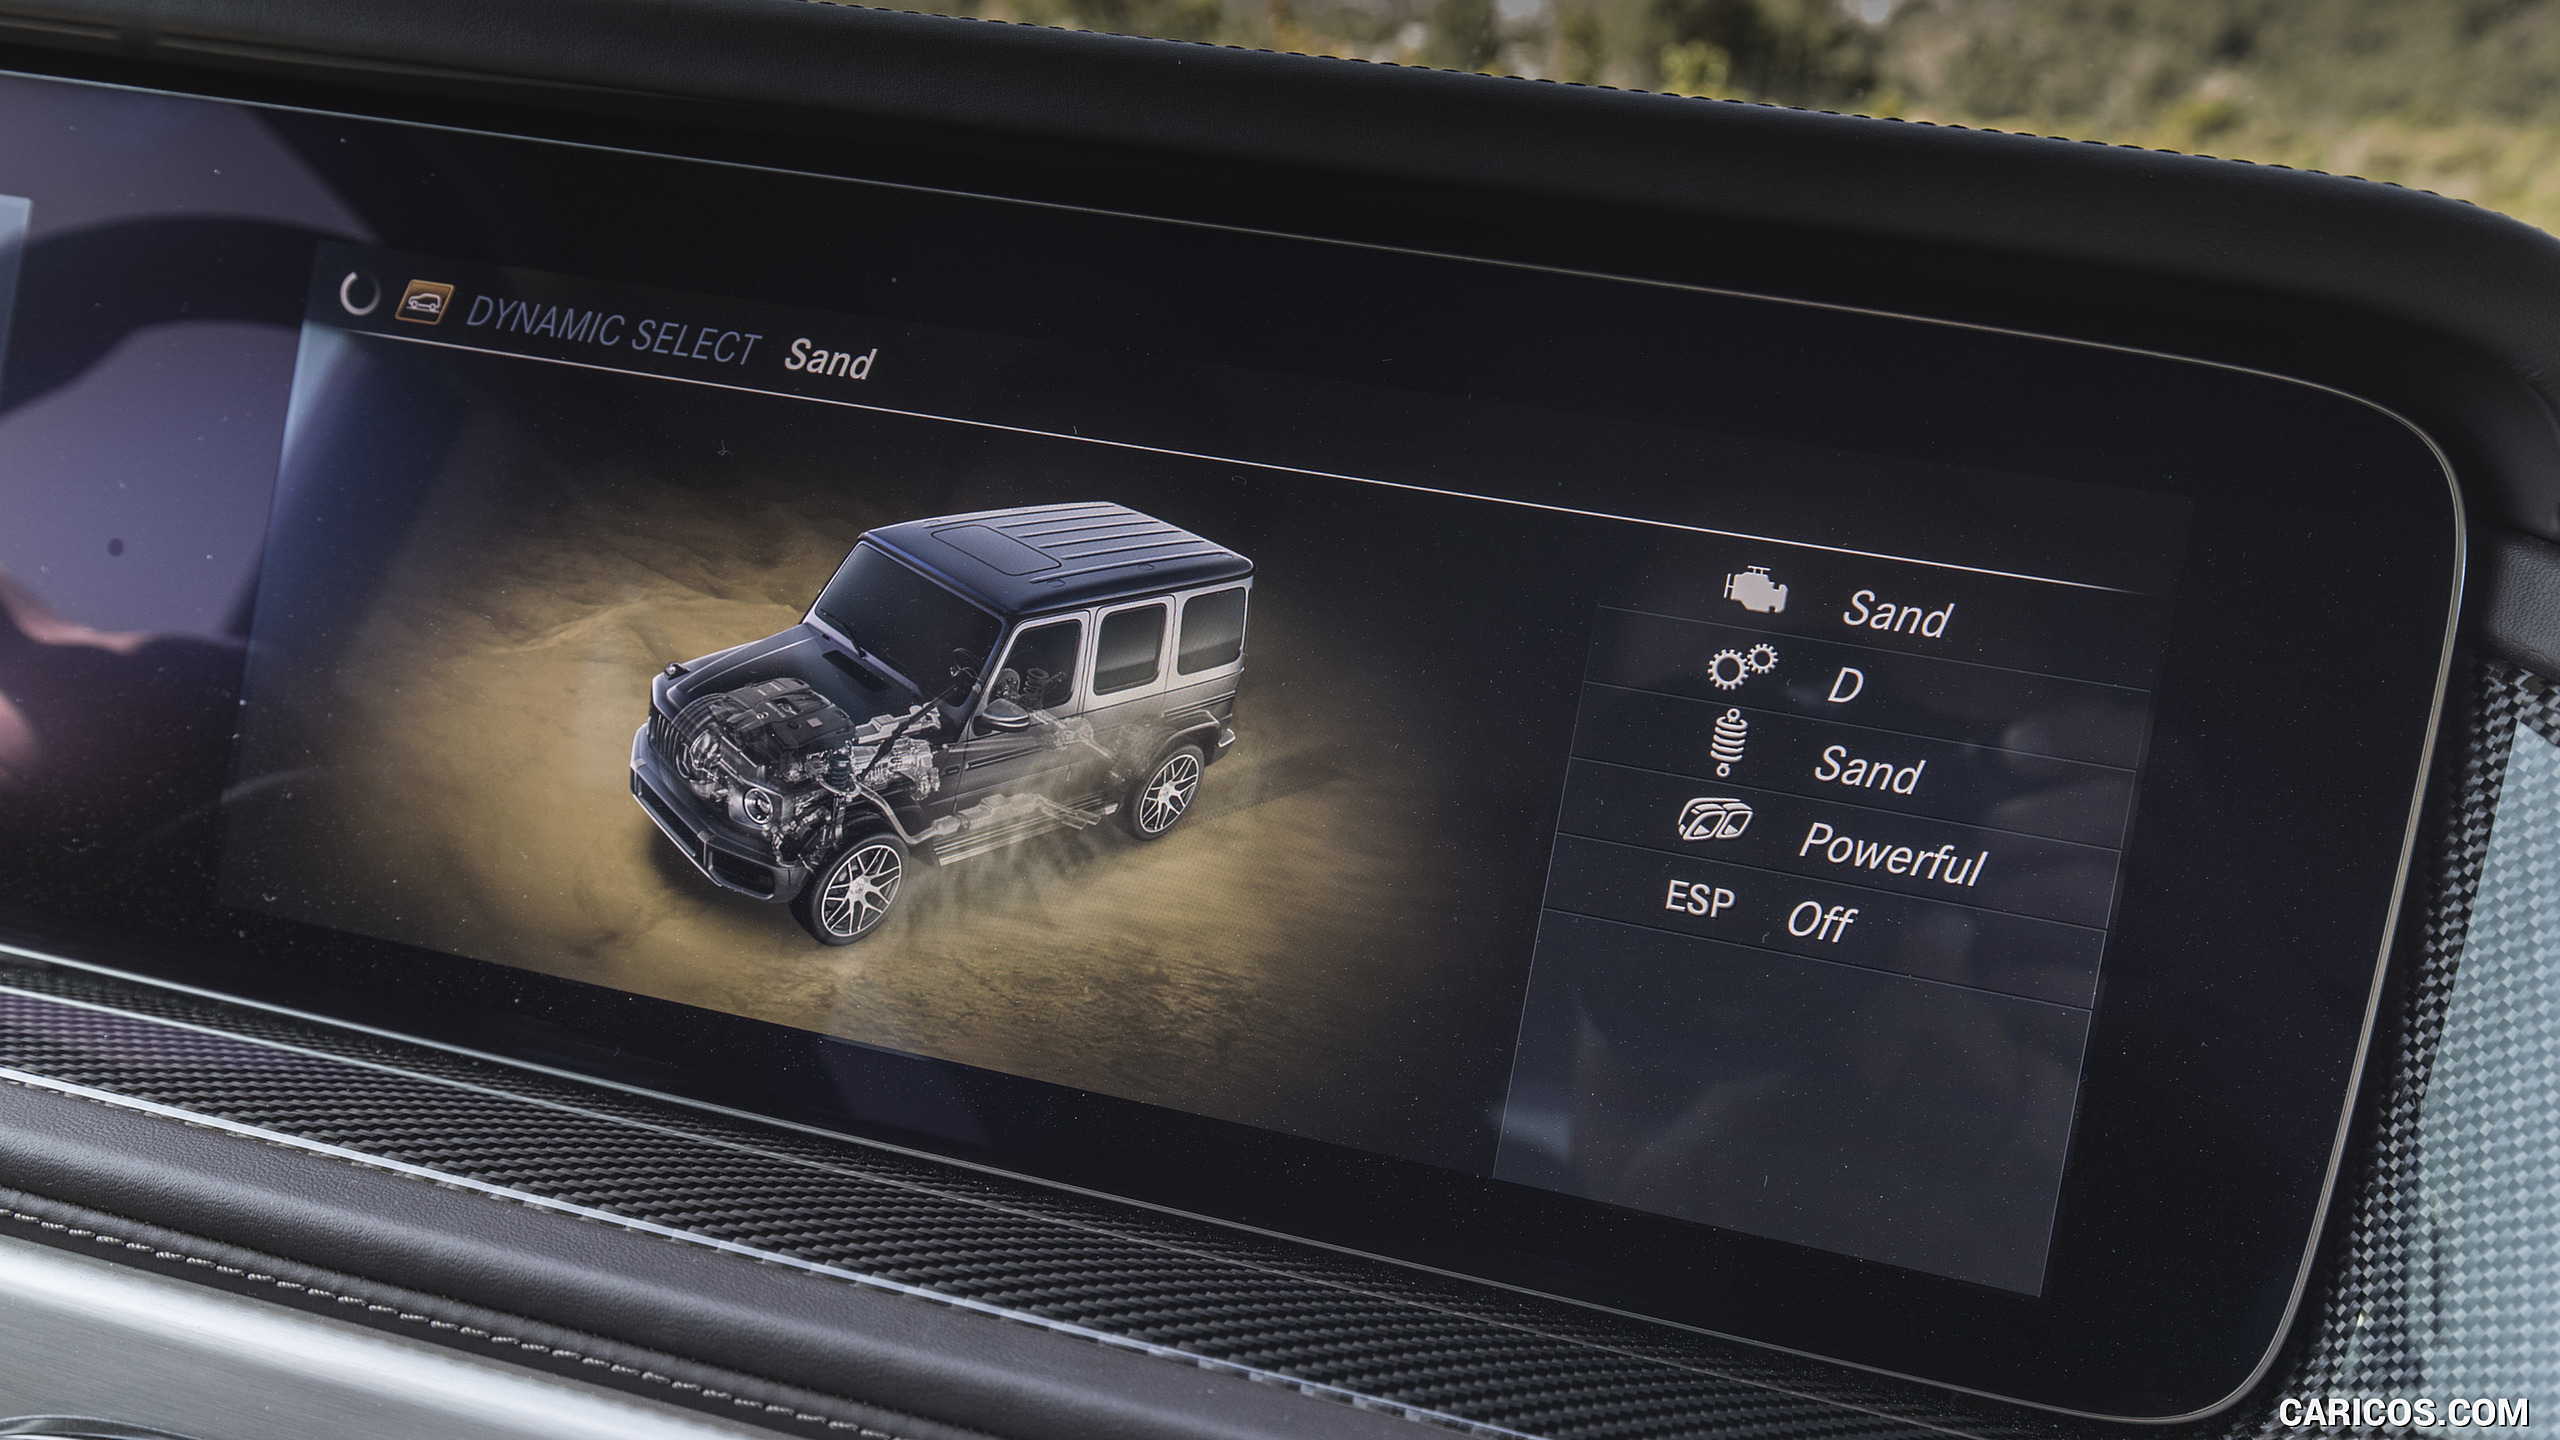 2019 Mercedes-AMG G63 - Central Console, #207 of 452